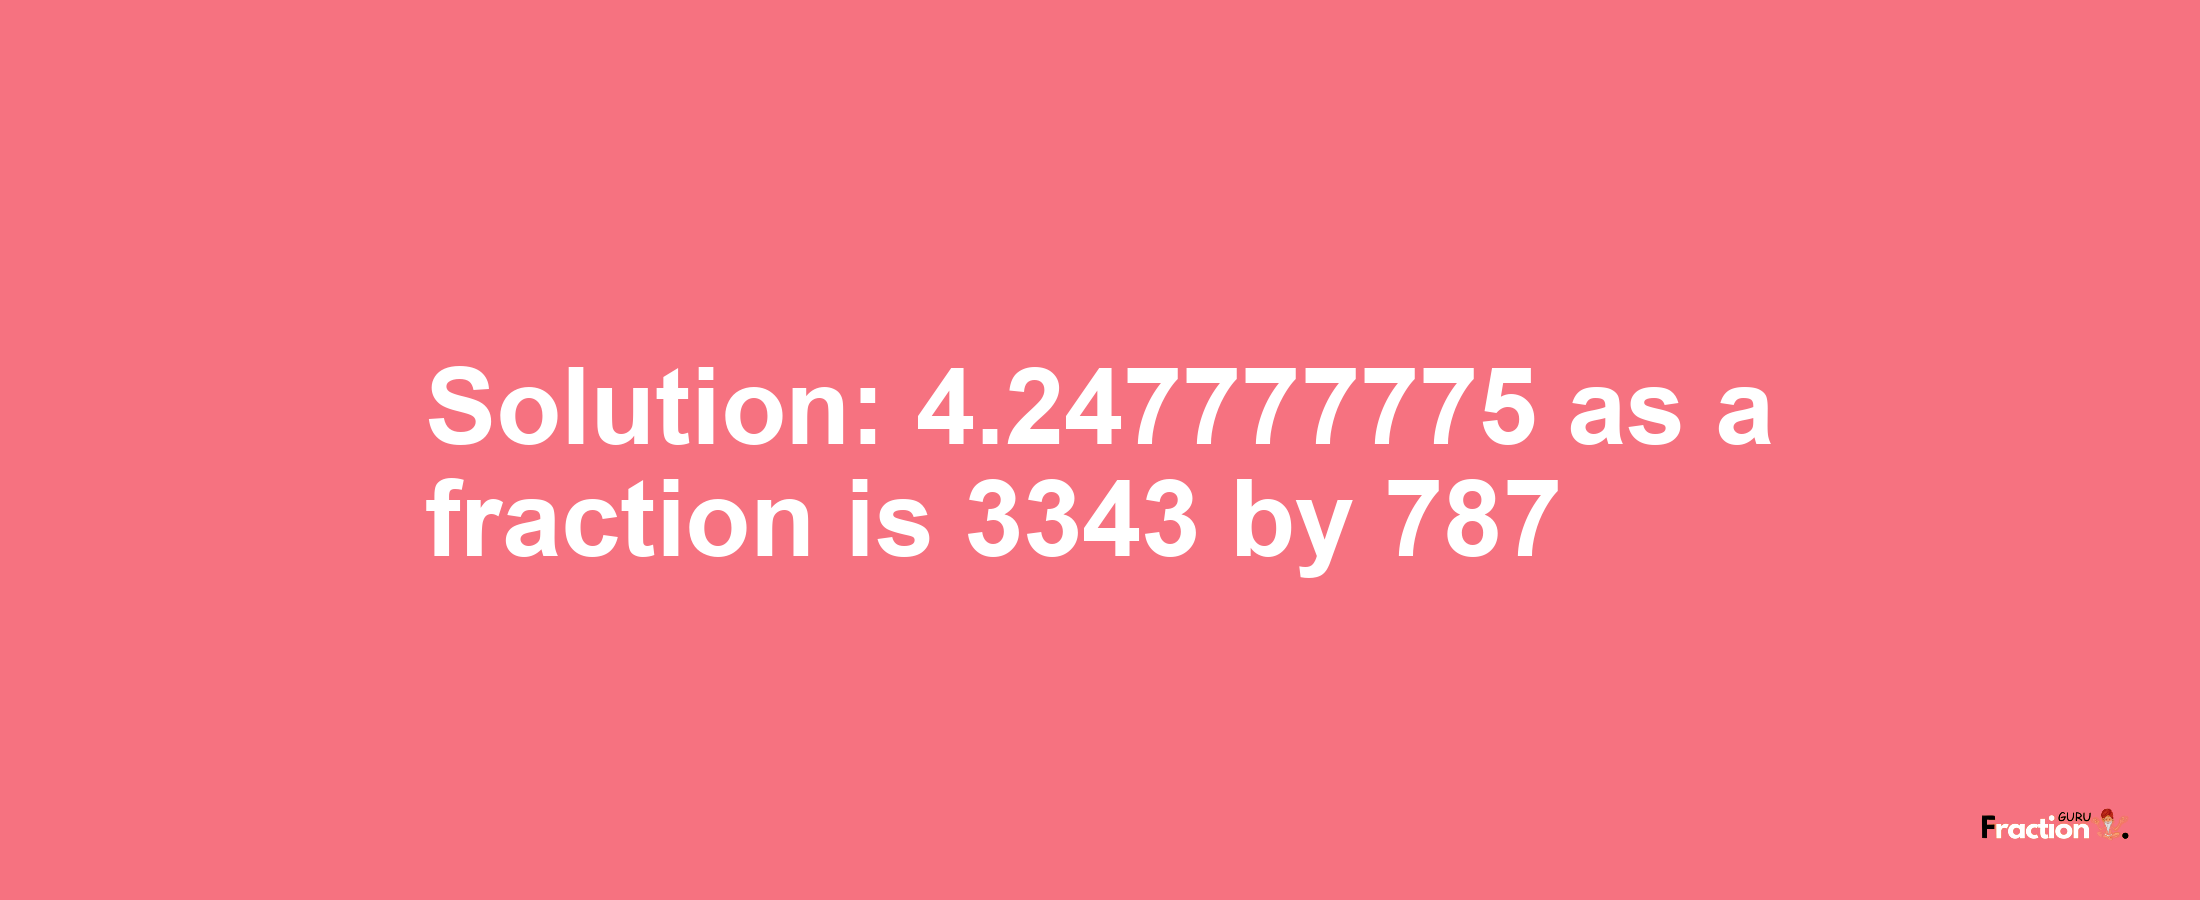 Solution:4.247777775 as a fraction is 3343/787